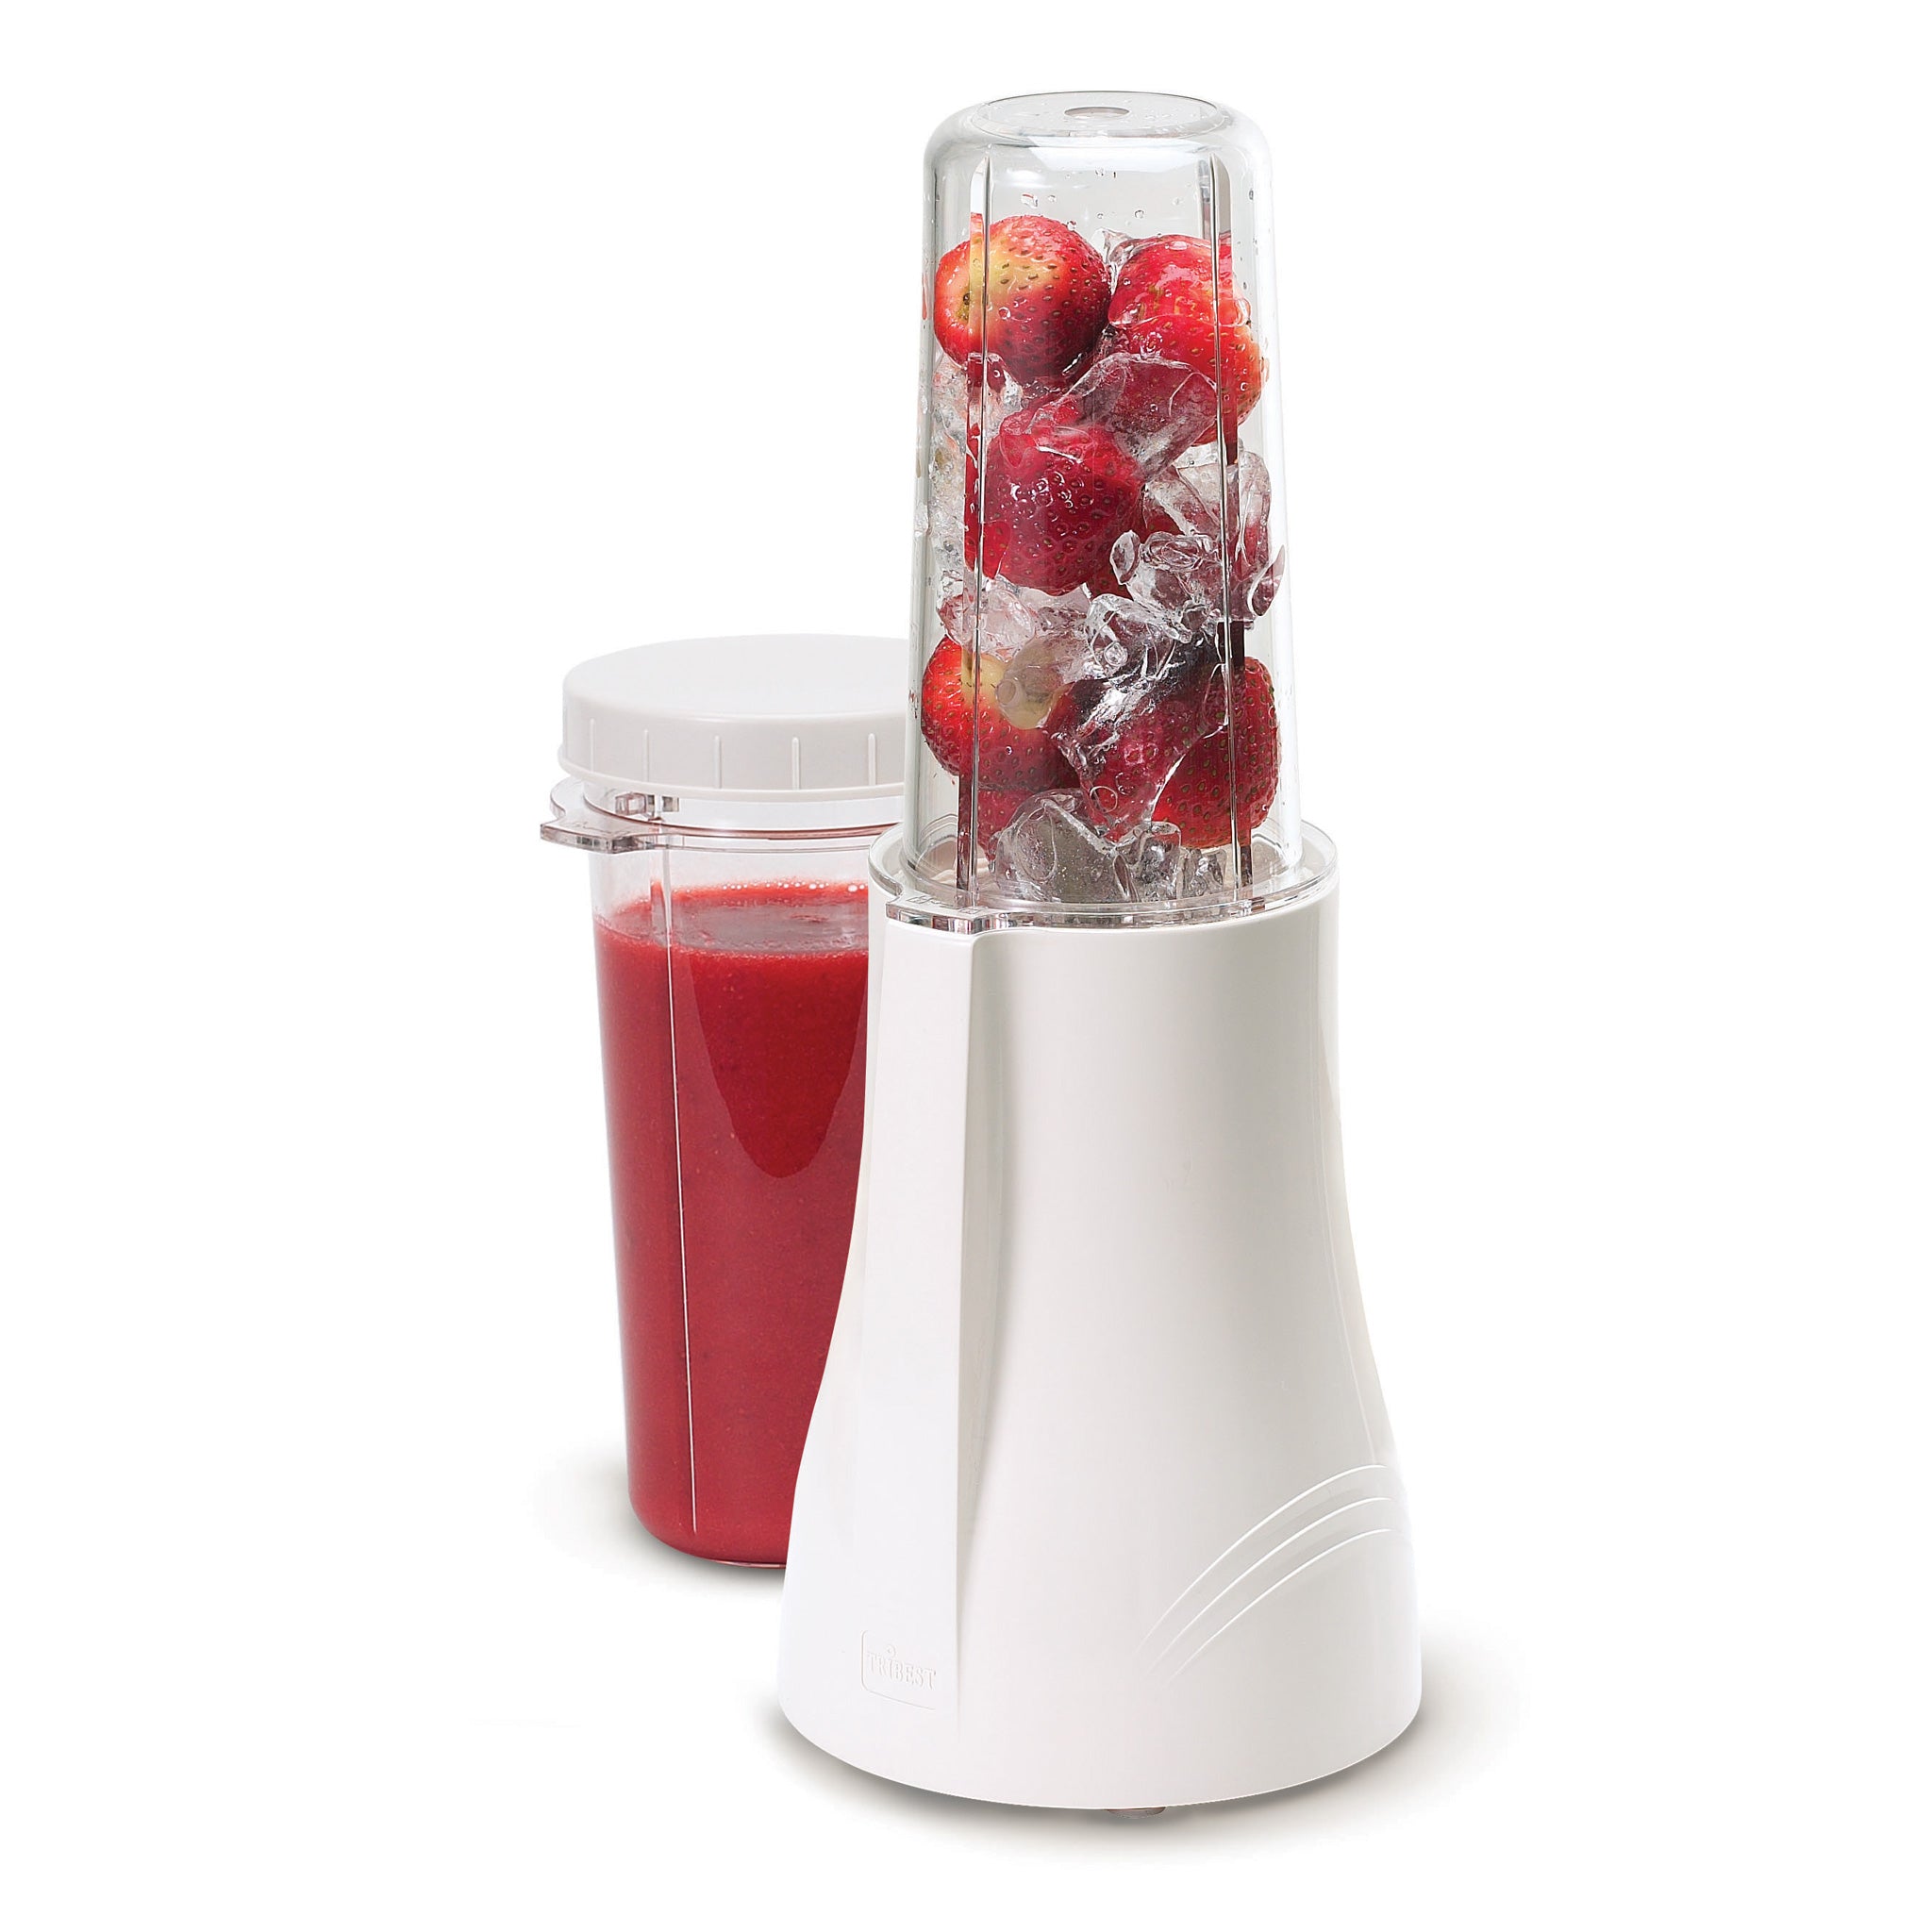 The Best Personal Blender for Smoothies, Salad Dressing, and More 